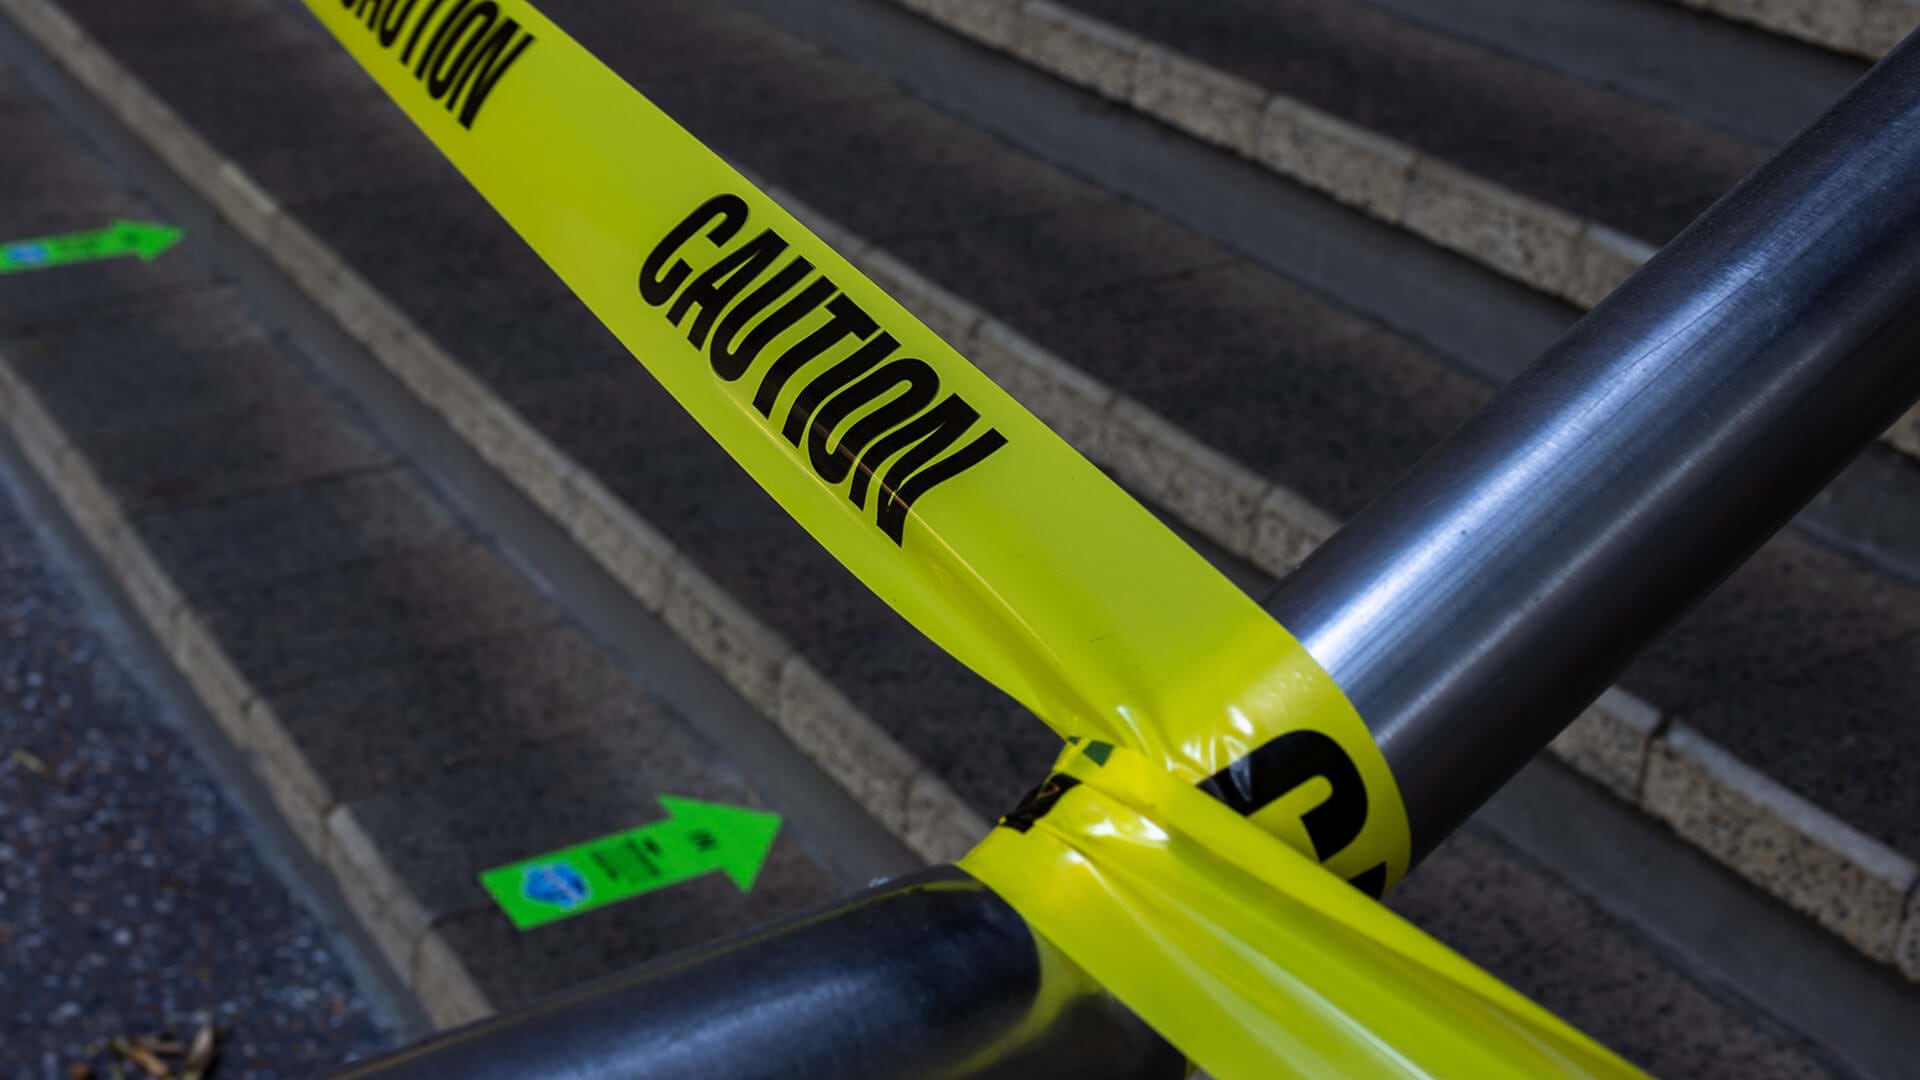 Risk management is symbolized by caution tape over a stairway